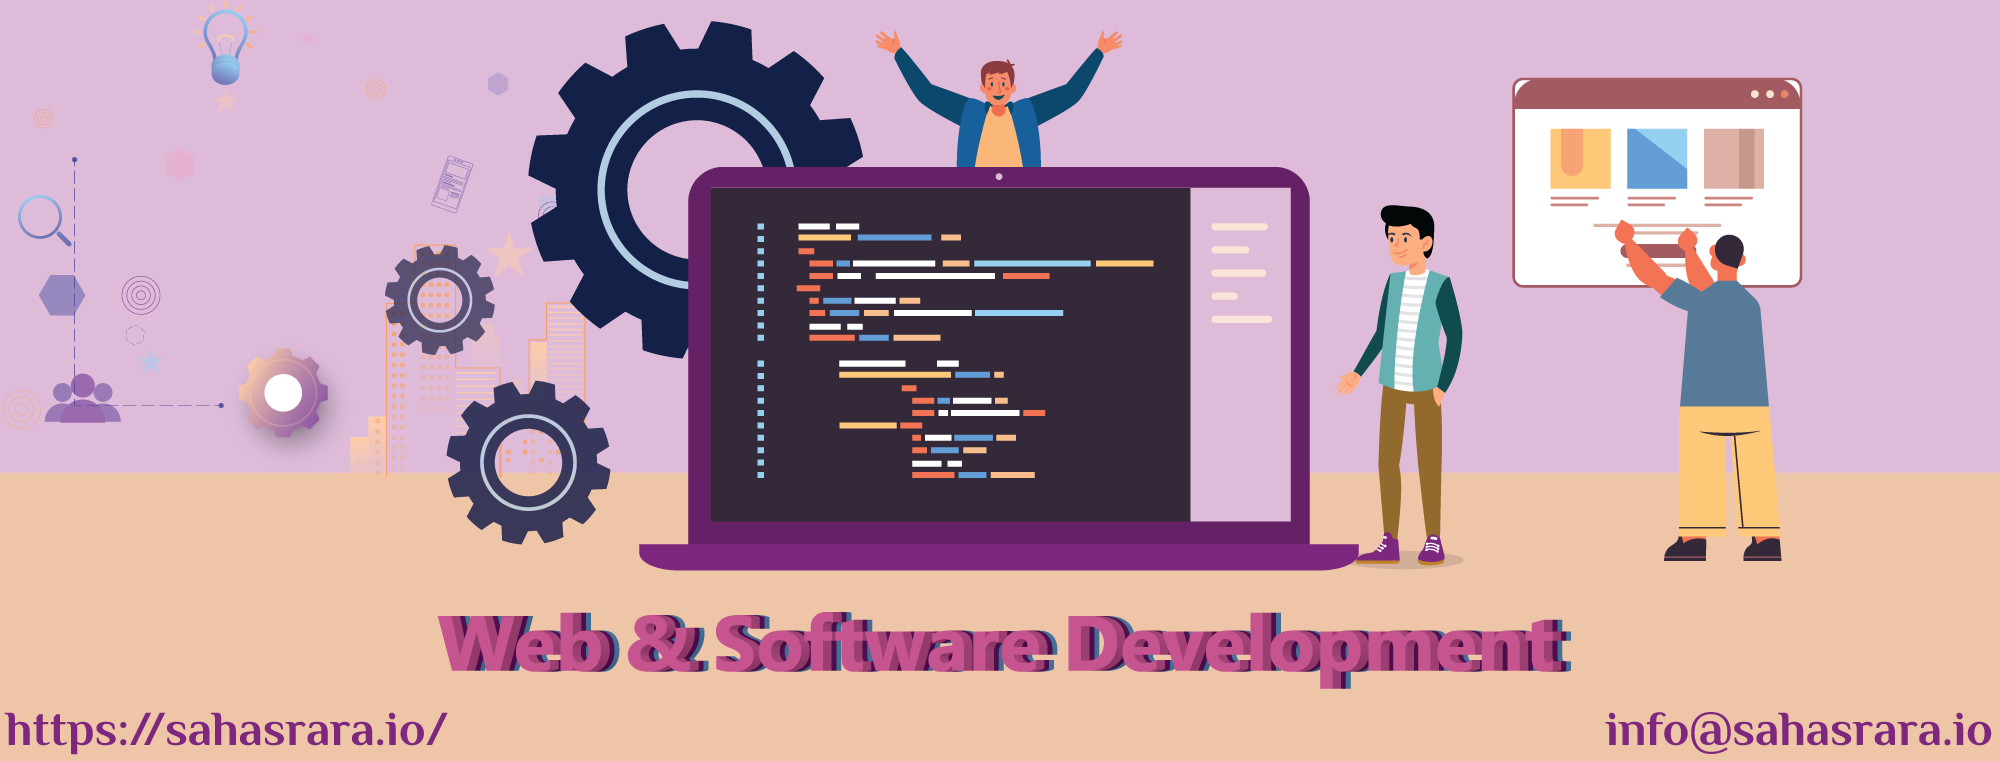 Web and software development